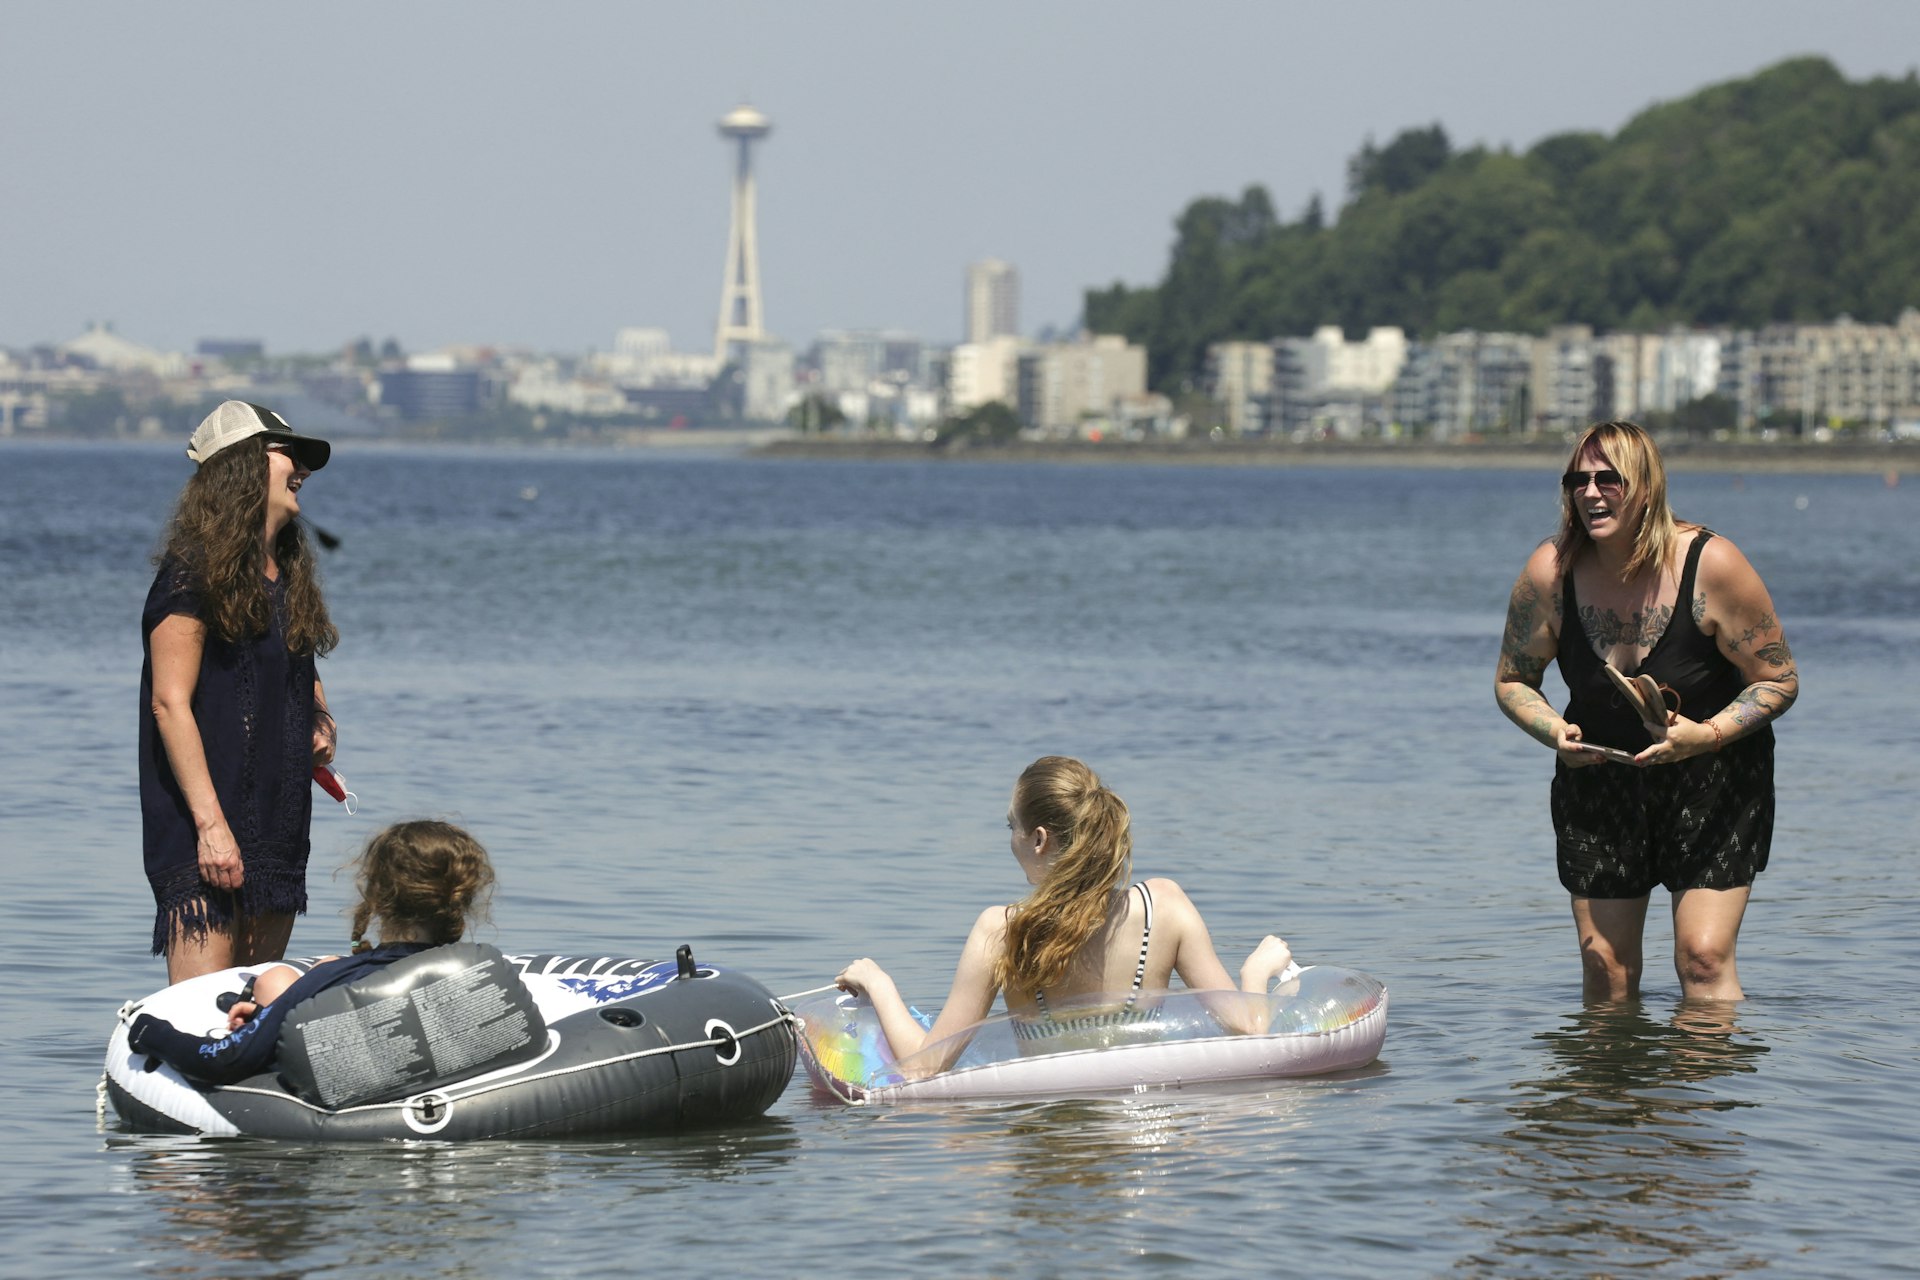 People in the water with the skyline in the distance at Alki Beach, Seattle, Washington, USA